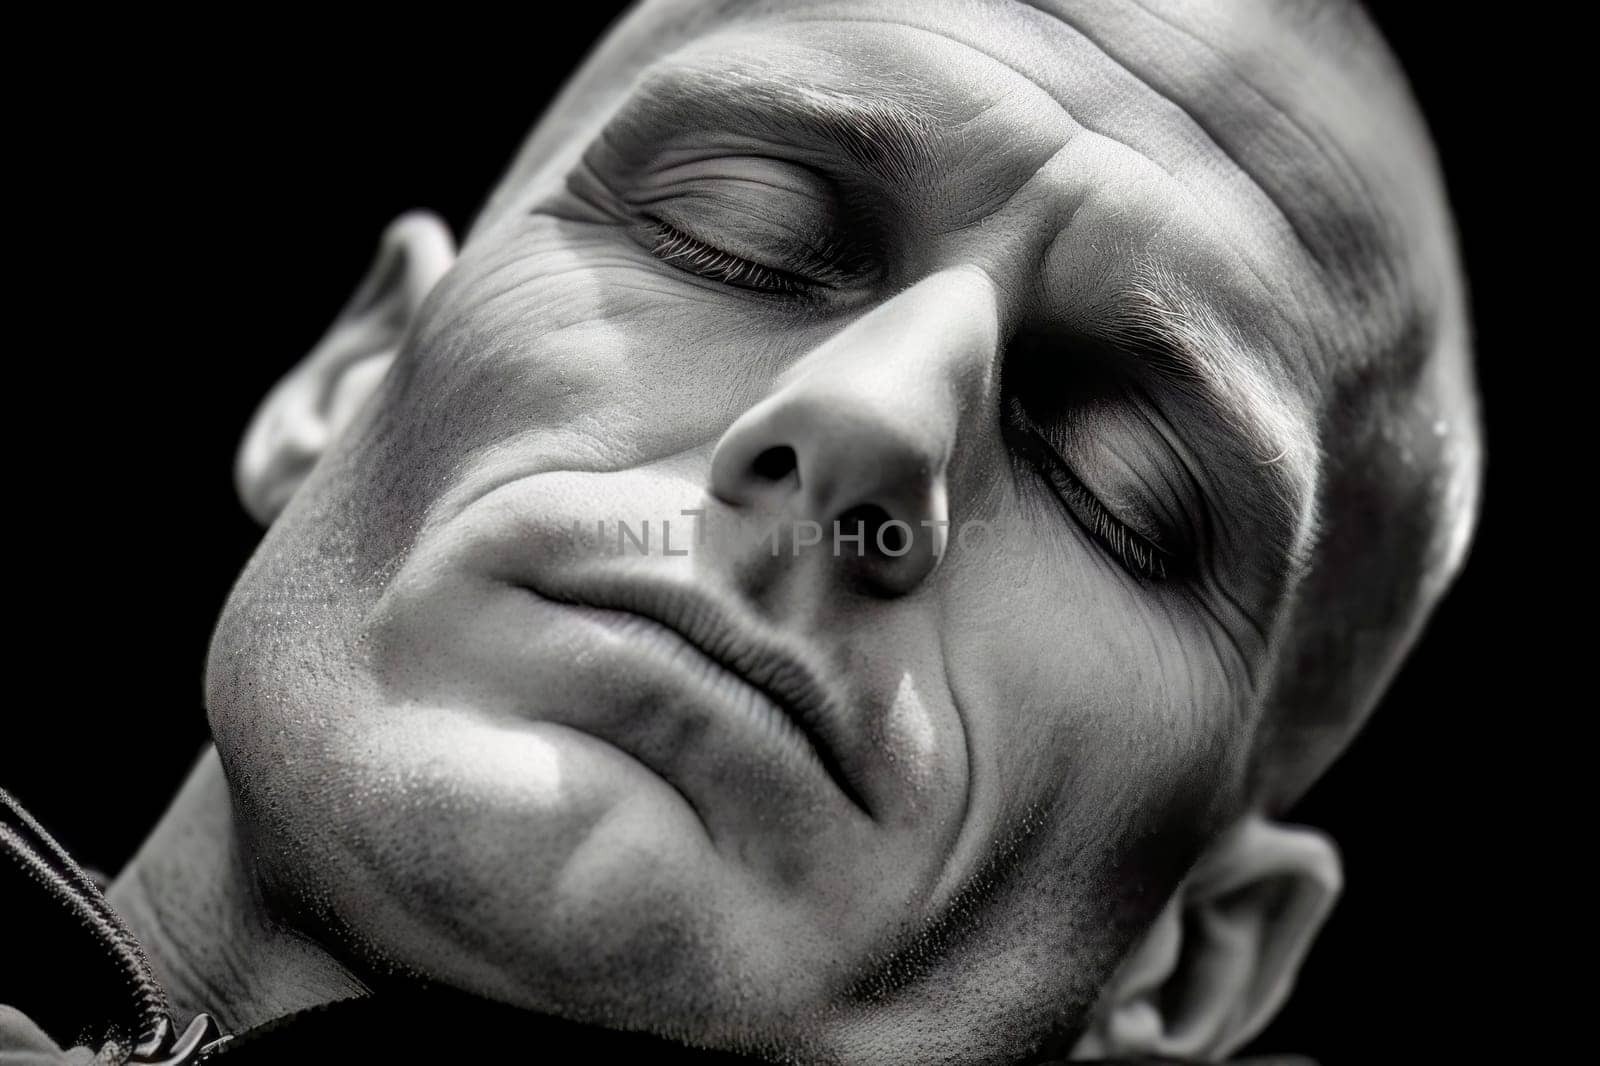 A captivating black and white portrait of a sleeping man with angular features, exuding a sense of mystery